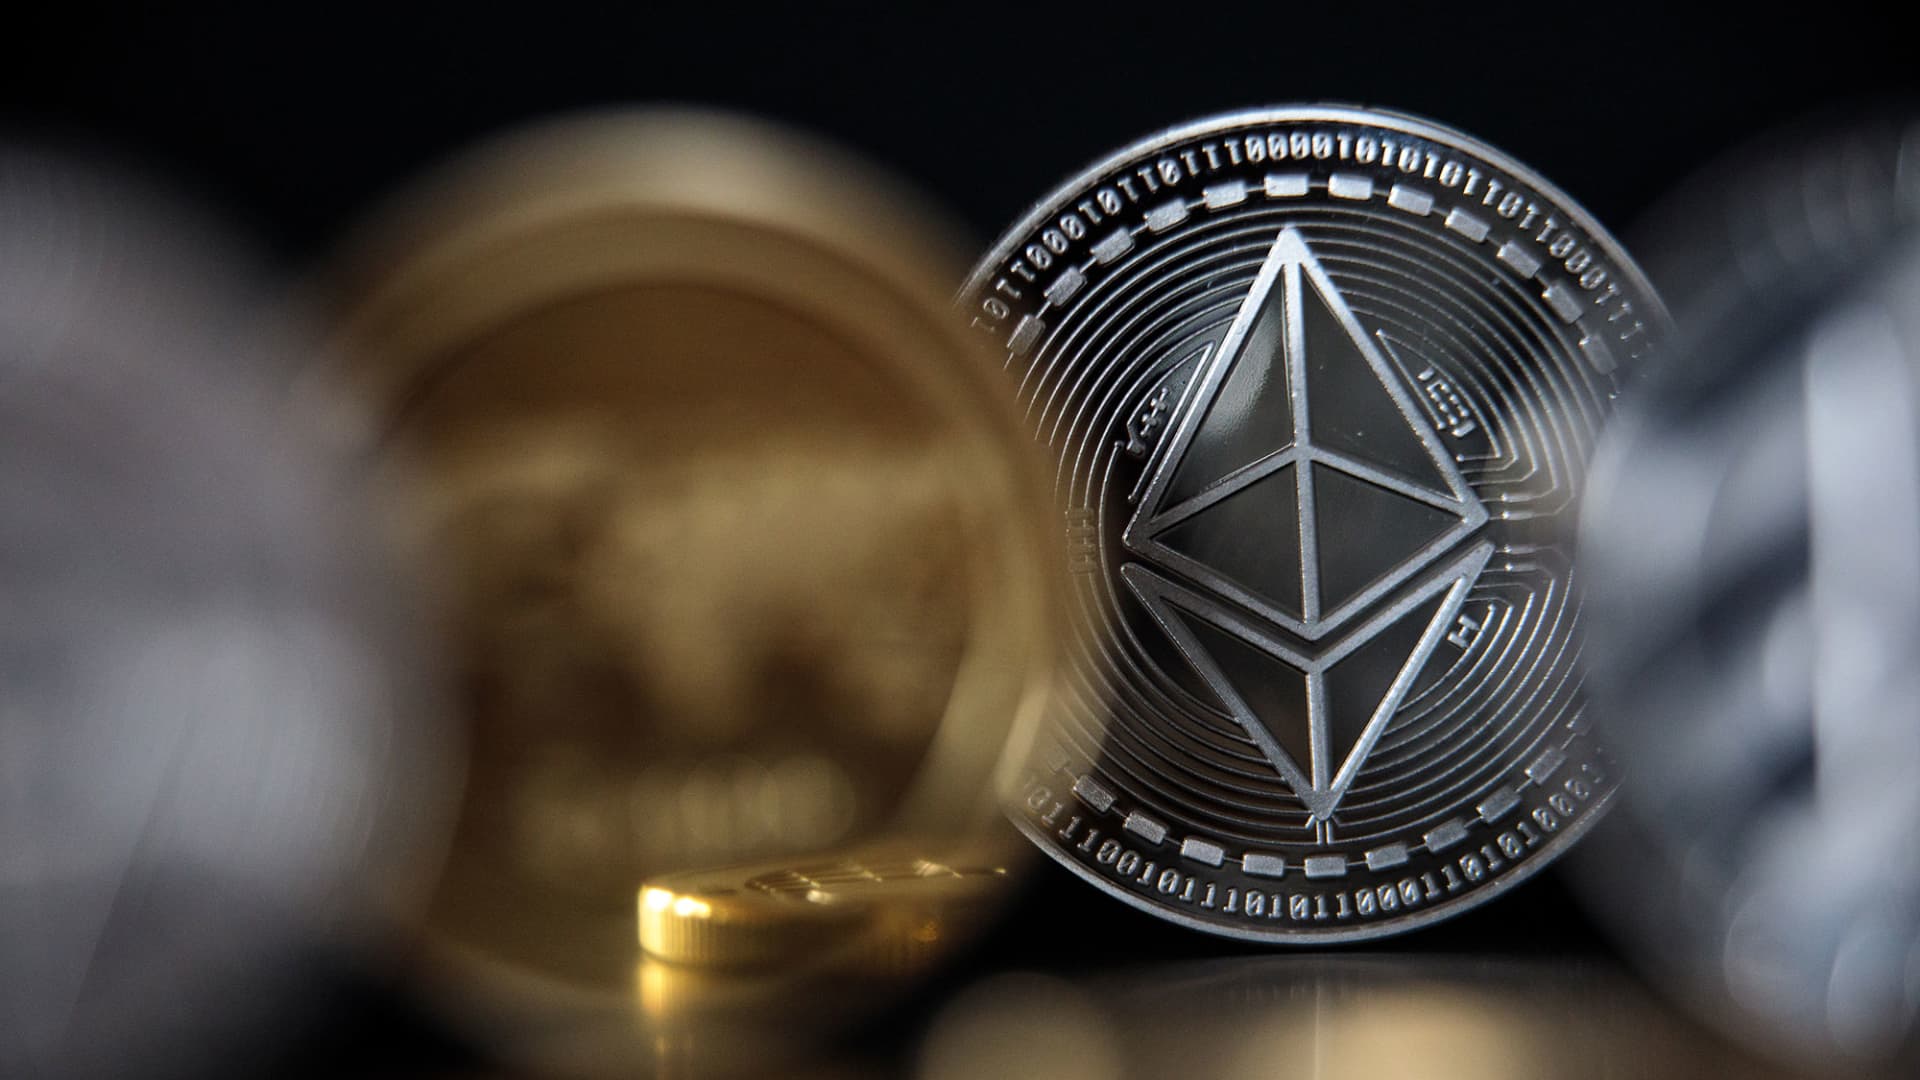 crypto-investors-still-haven-t-priced-in-the-upside-from-the-ethereum-merge-jpmorgan-says